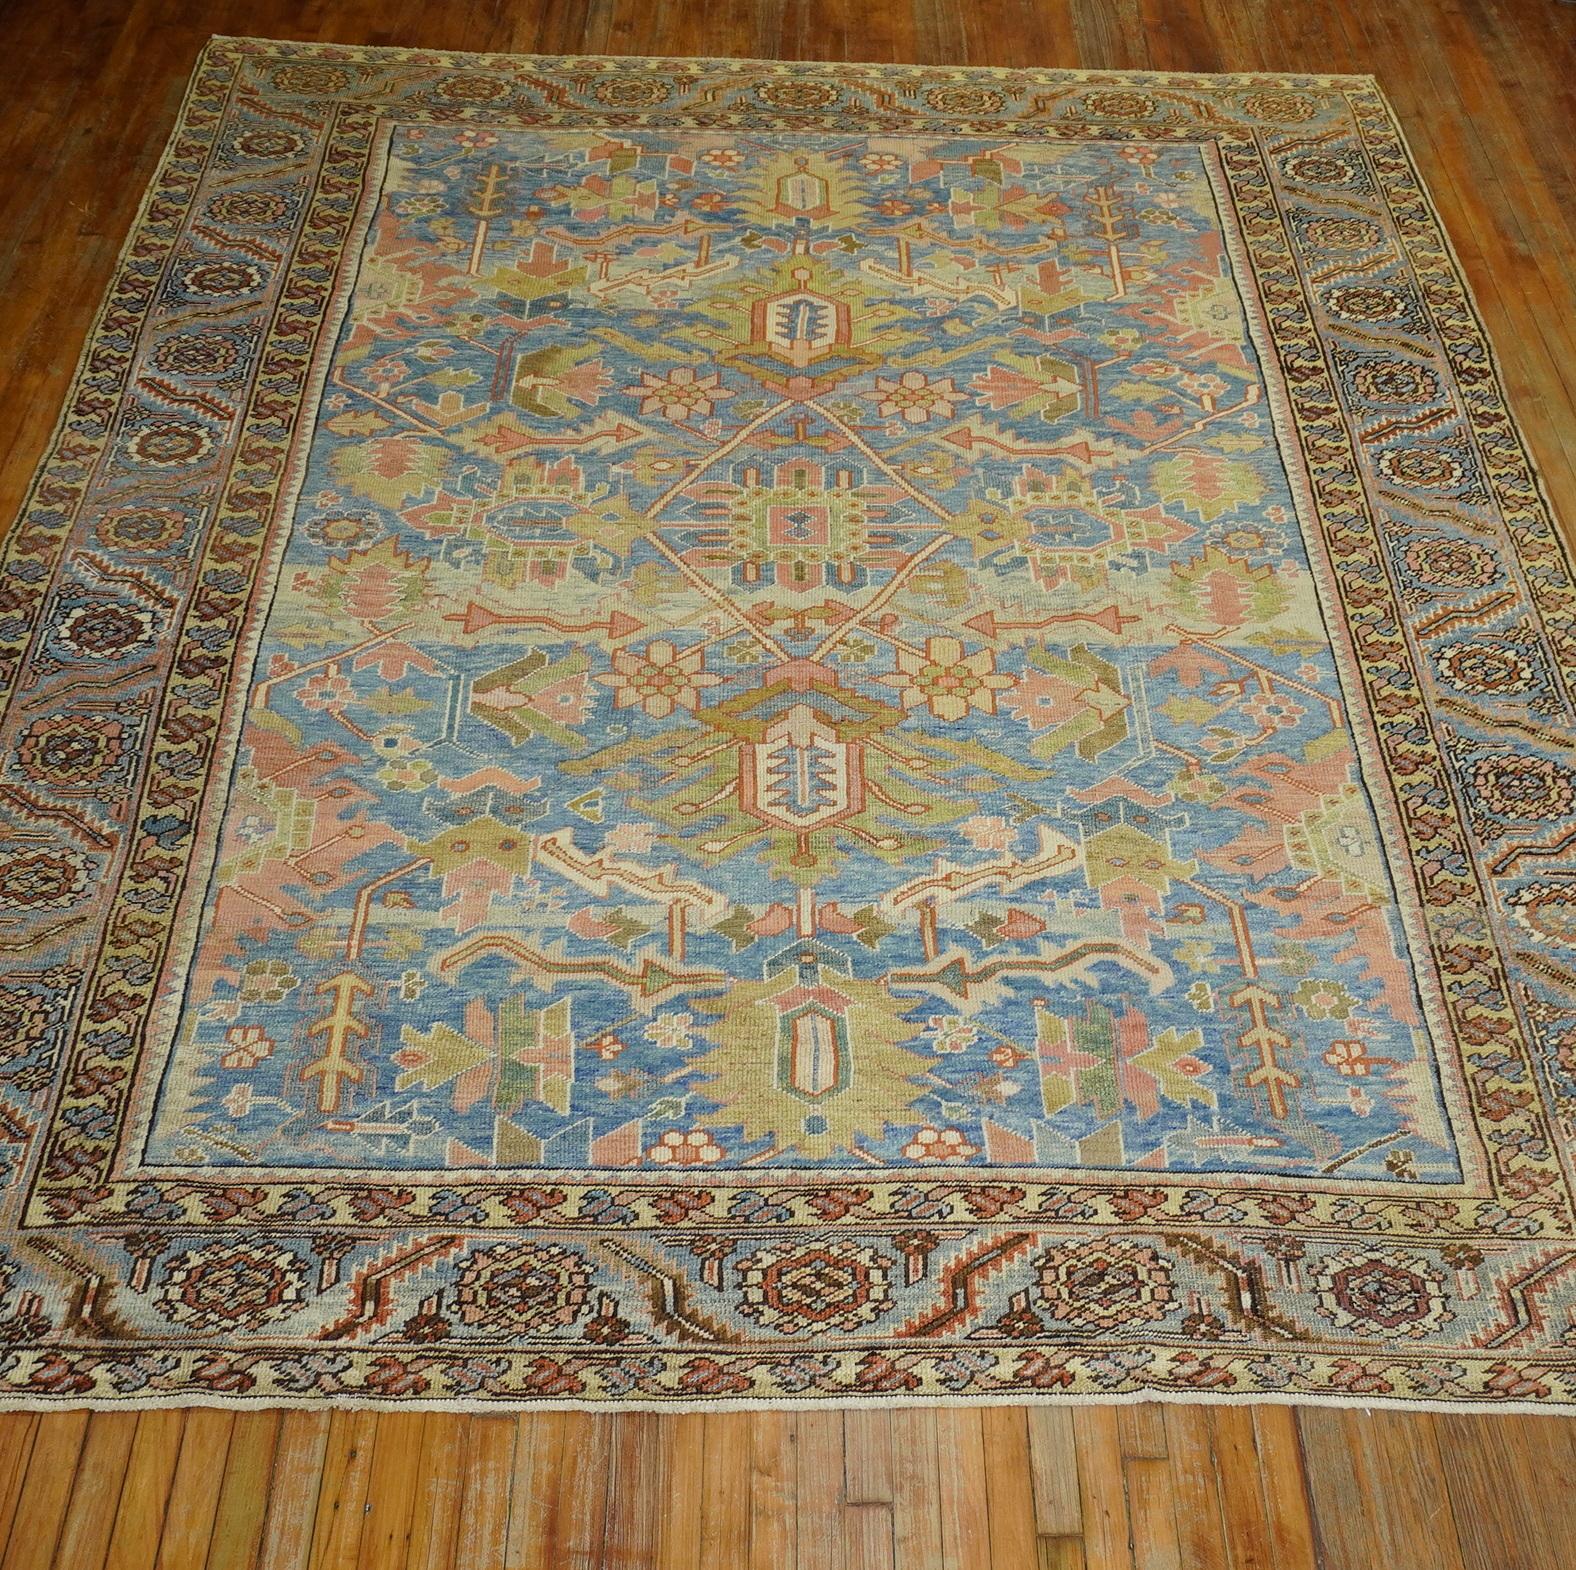 Stunning sky blue field early 20th century decorative Persian Heriz. The border is a light blue too, accents with a striking celery green accent color. Not your ordinary traditional Persian Heriz.

Measures: 9'3'' x 12'.